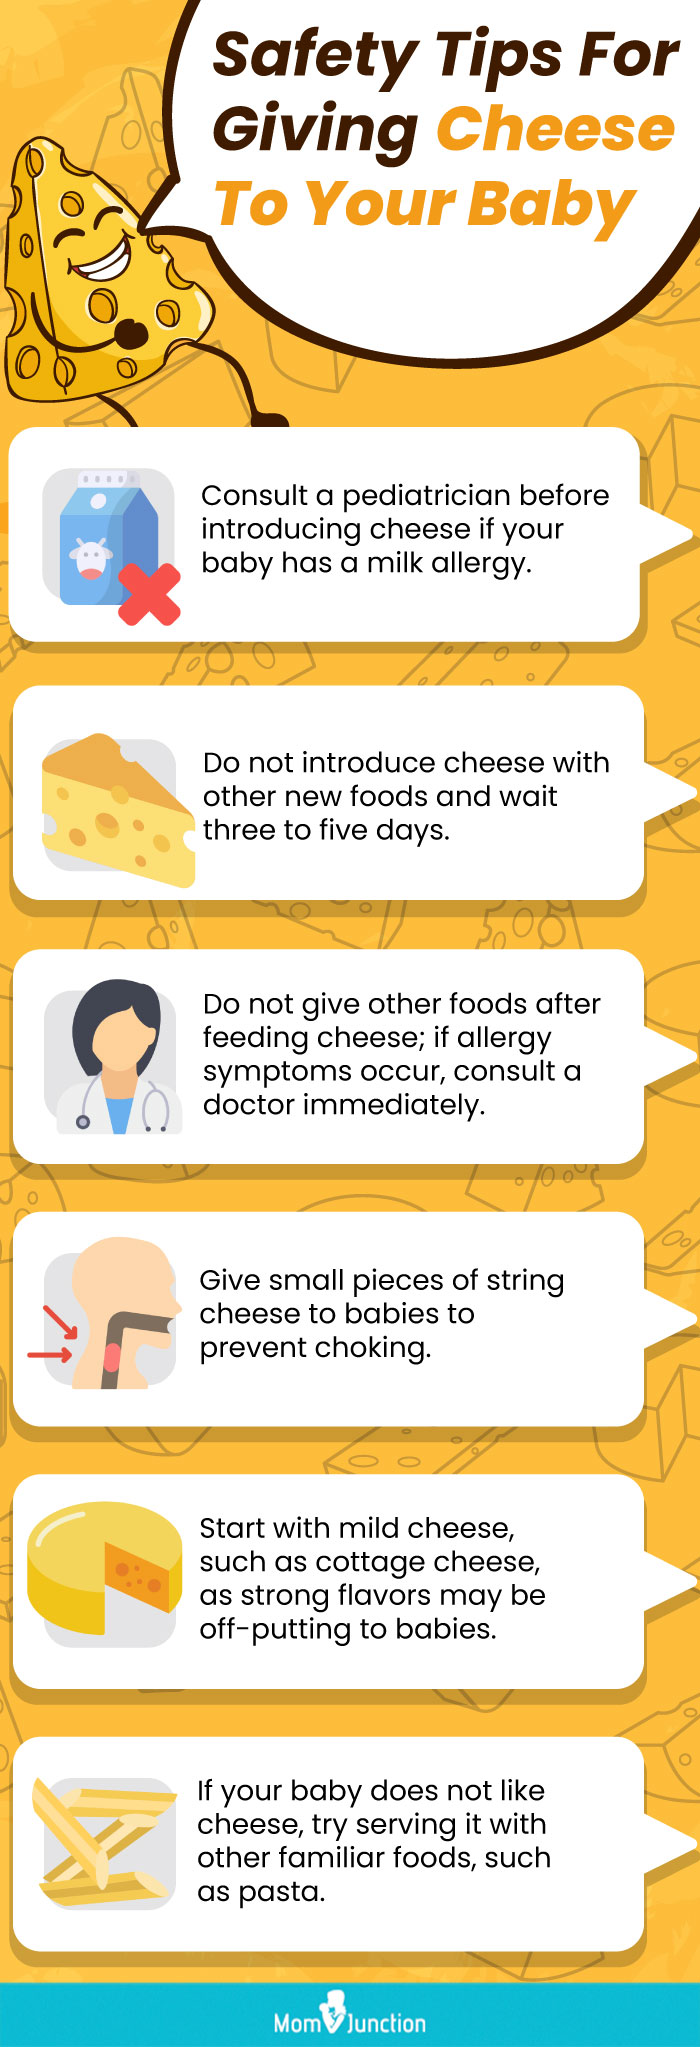 safety tips for giving cheese to your baby [infographic]